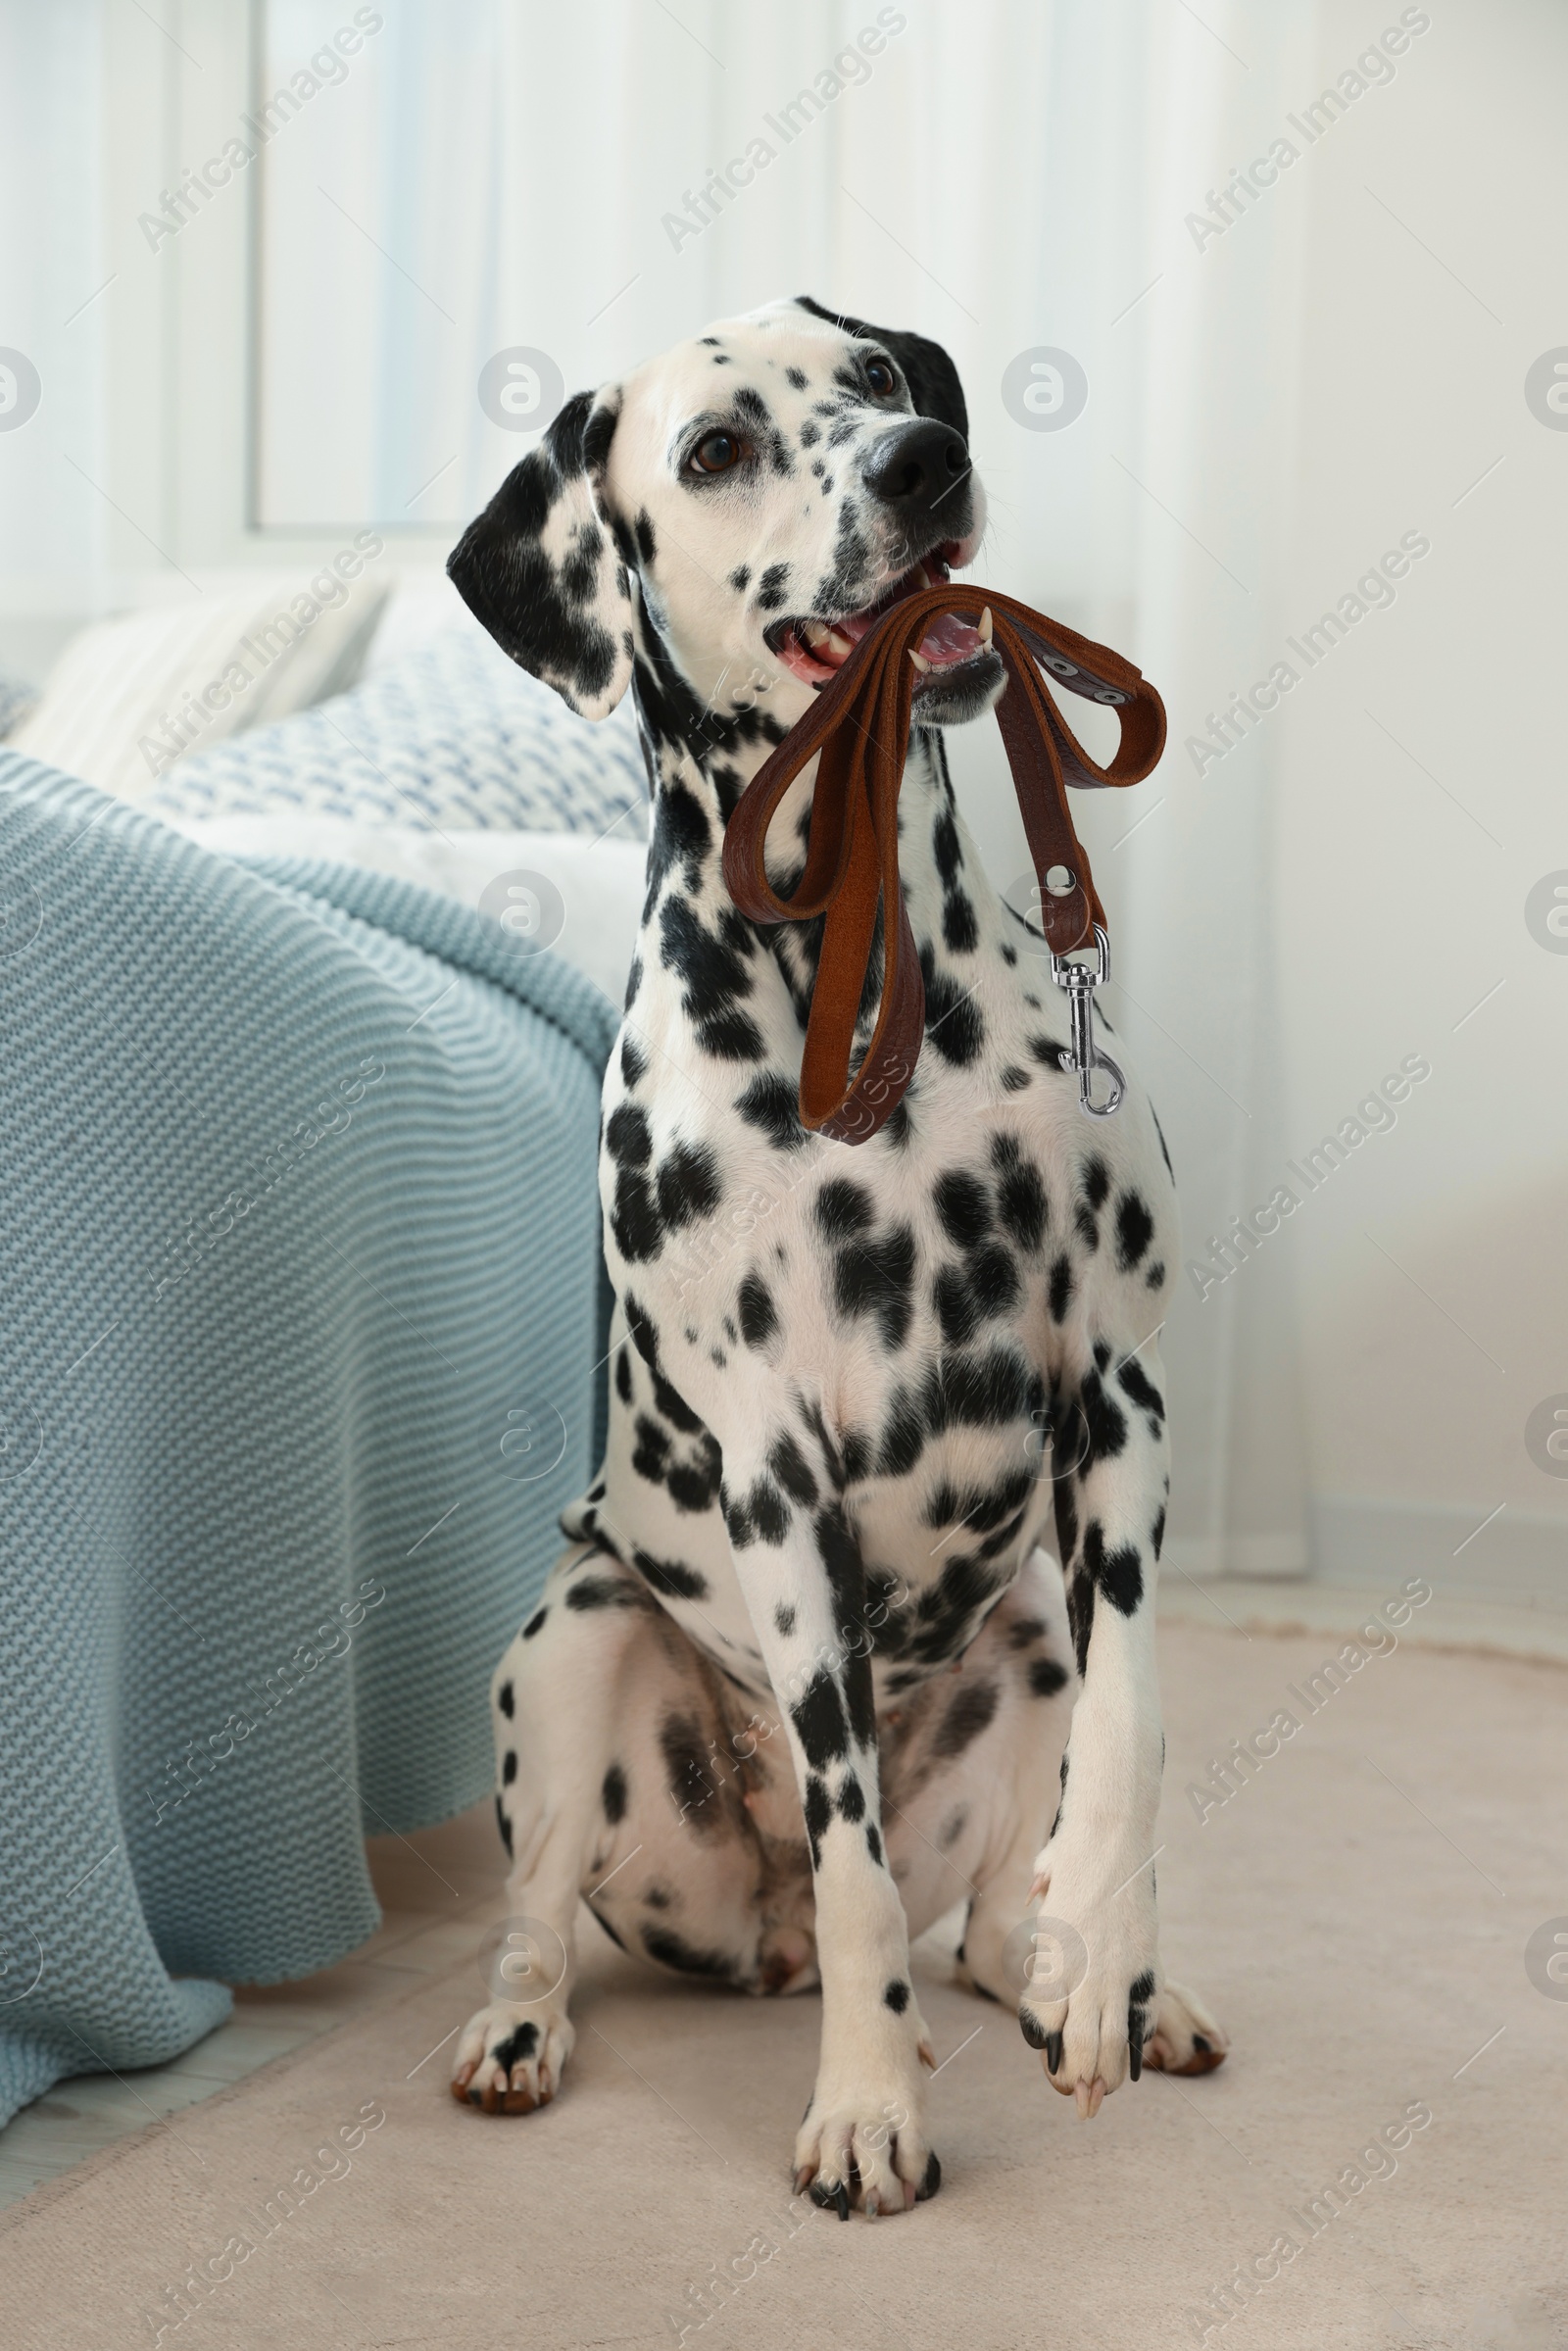 Image of Adorable Dalmatian dog holding leash in mouth indoors